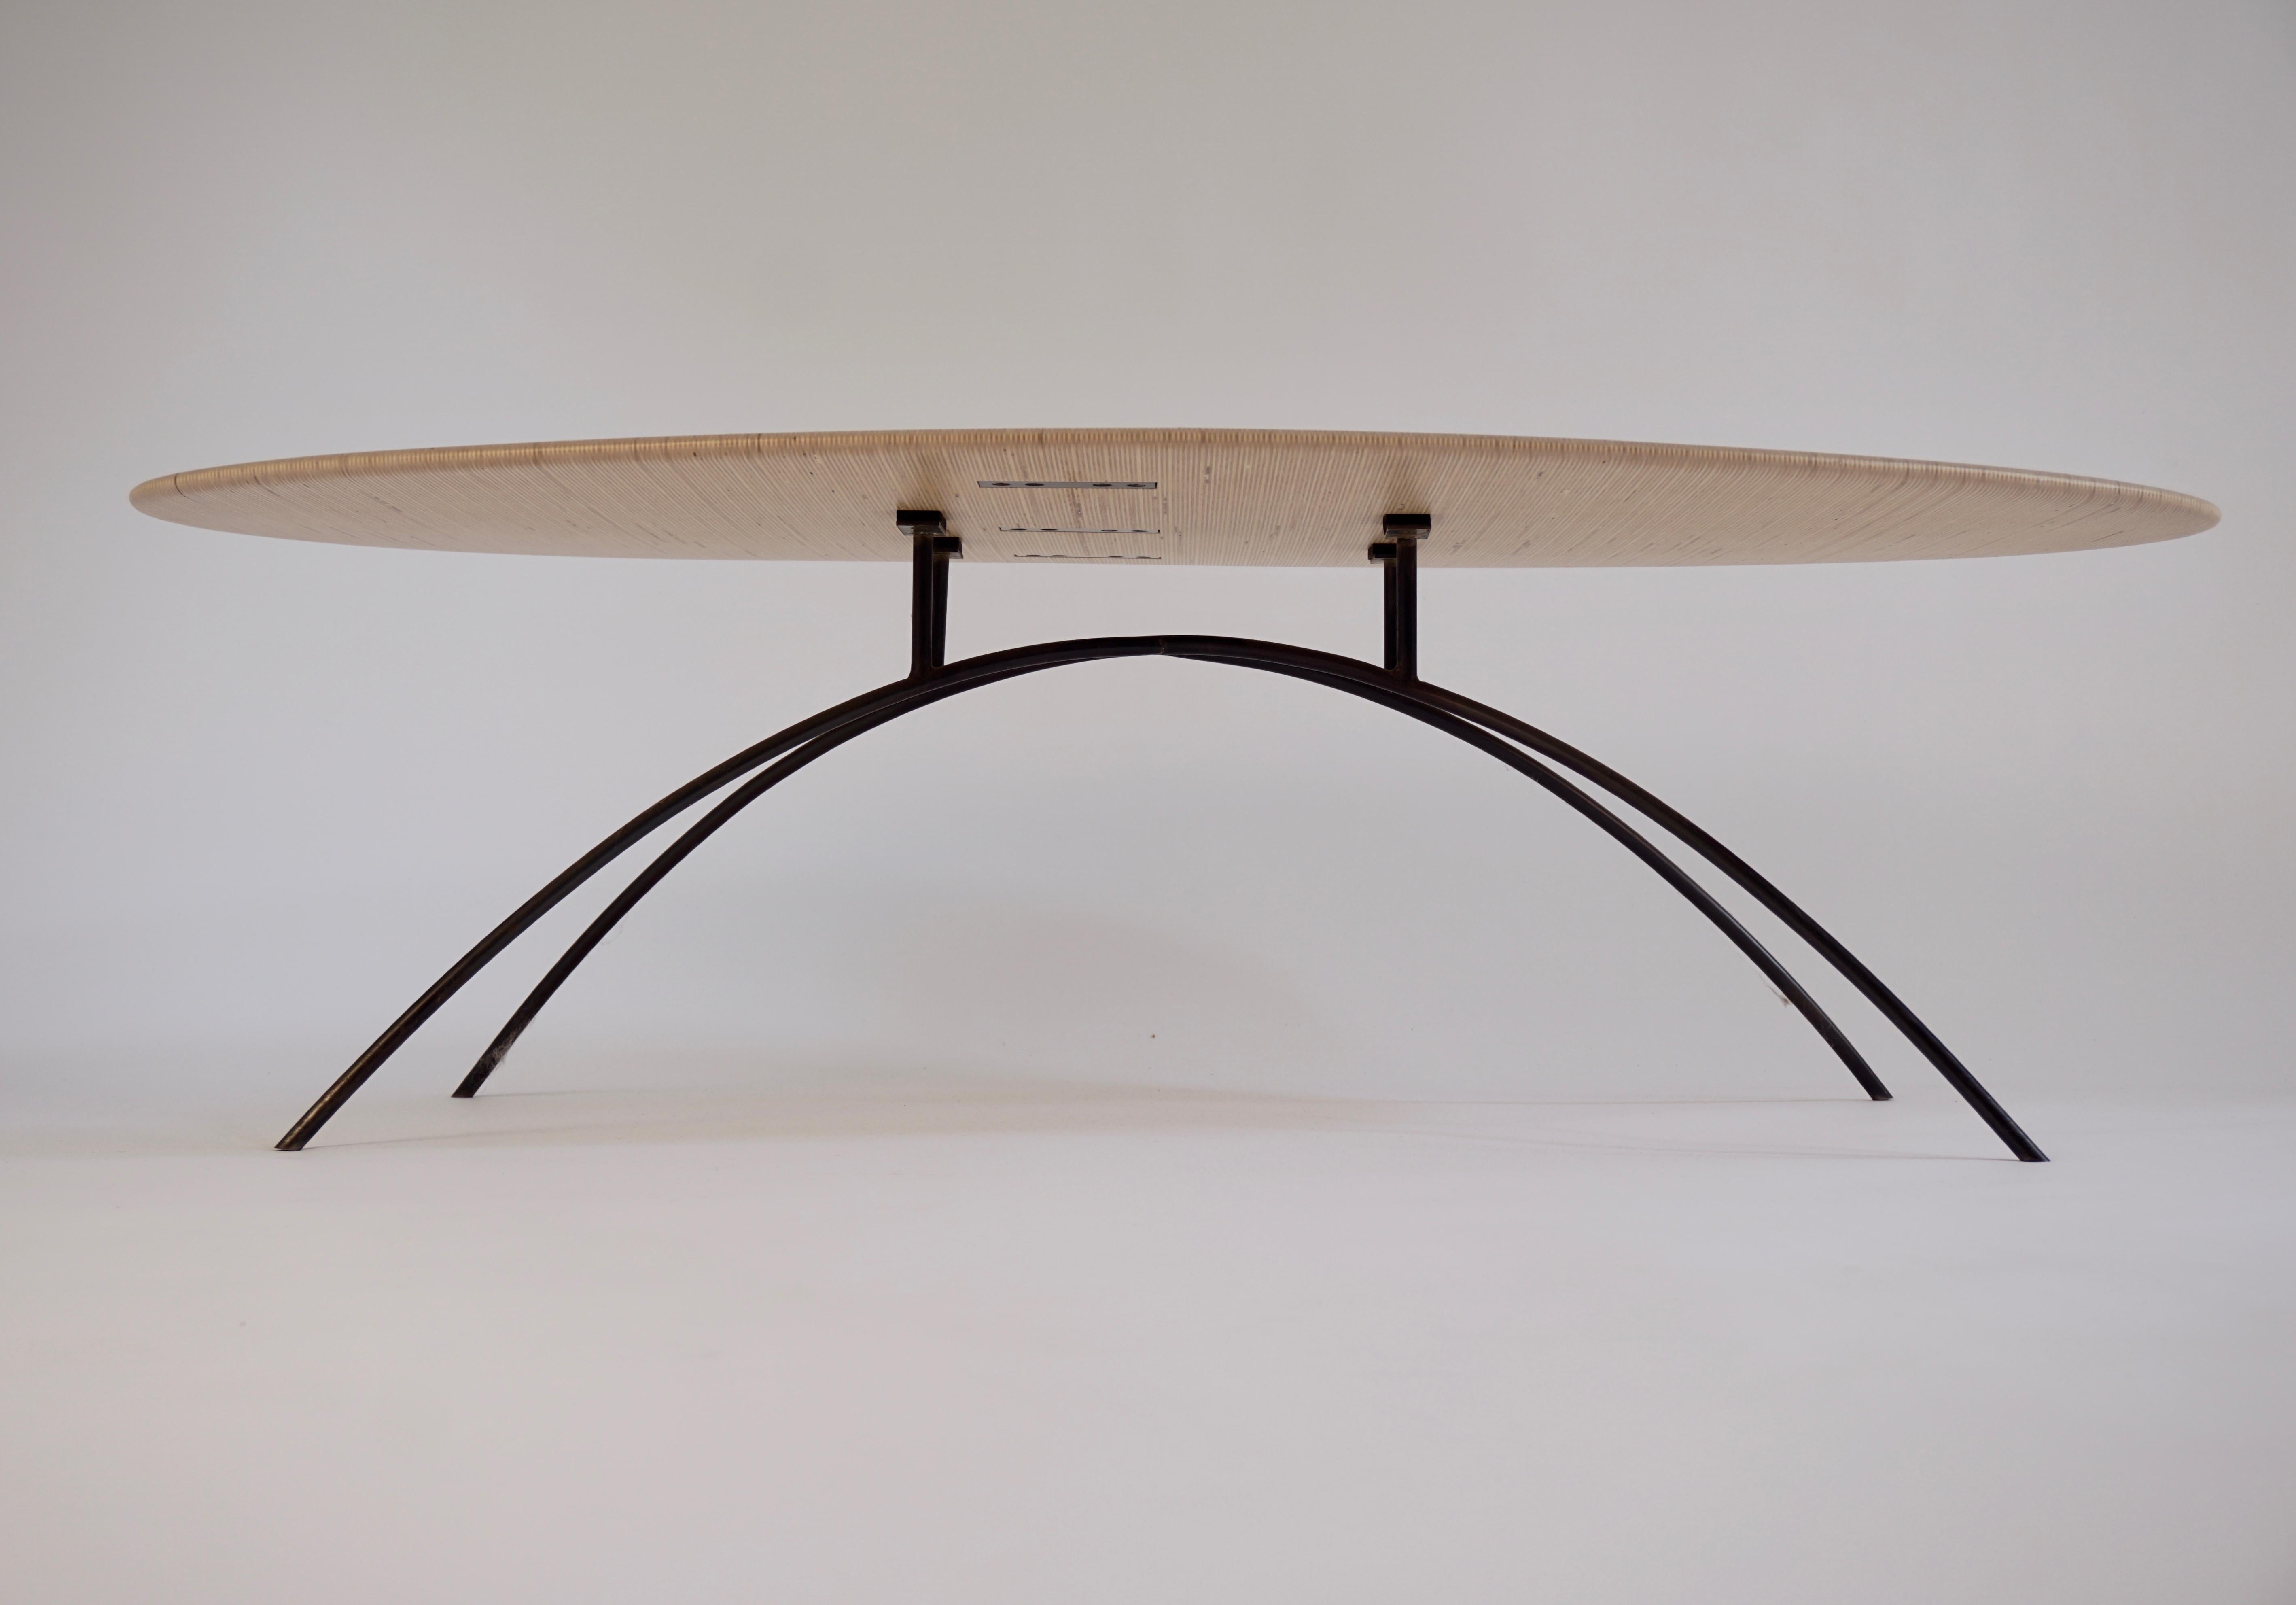 Bronze Sculpted Oval Coffee Table, Laminated Finnland Plywood